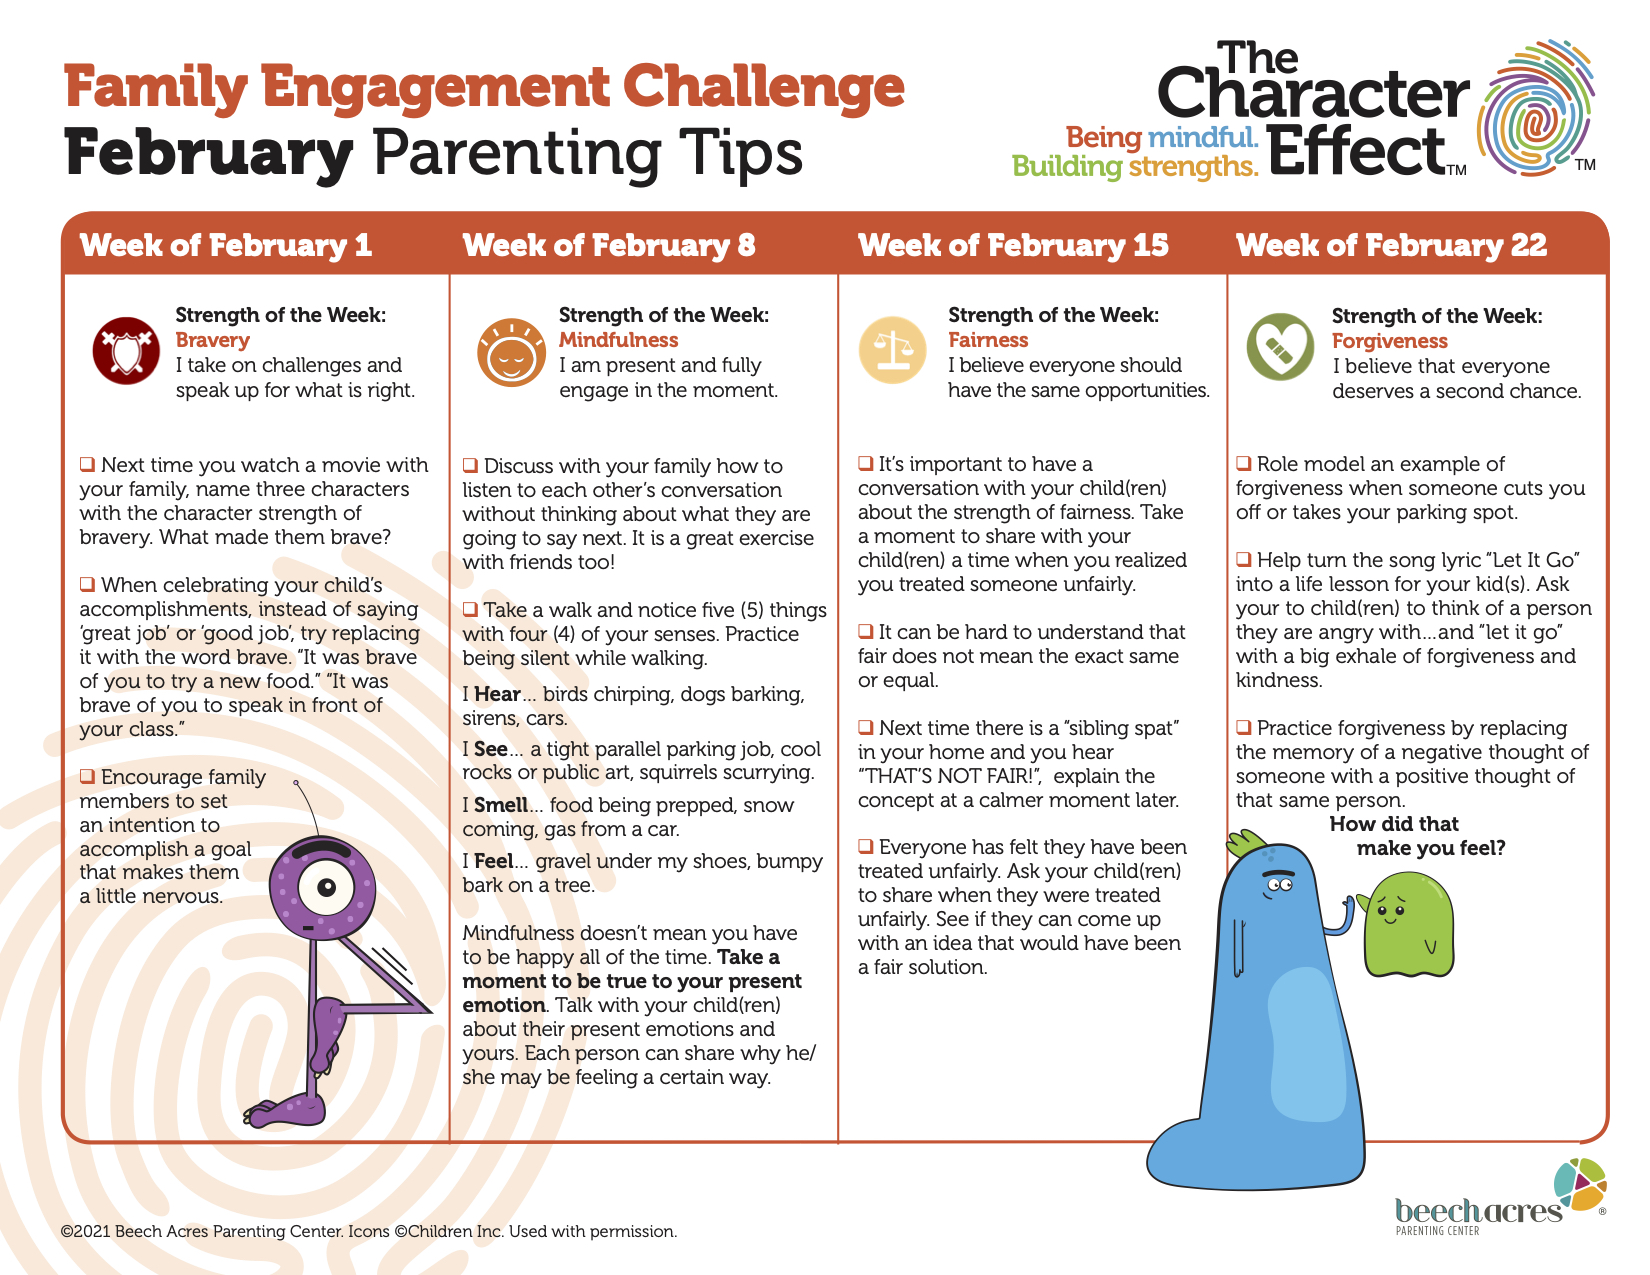 Family Engagement Challenge February Parenting Tips